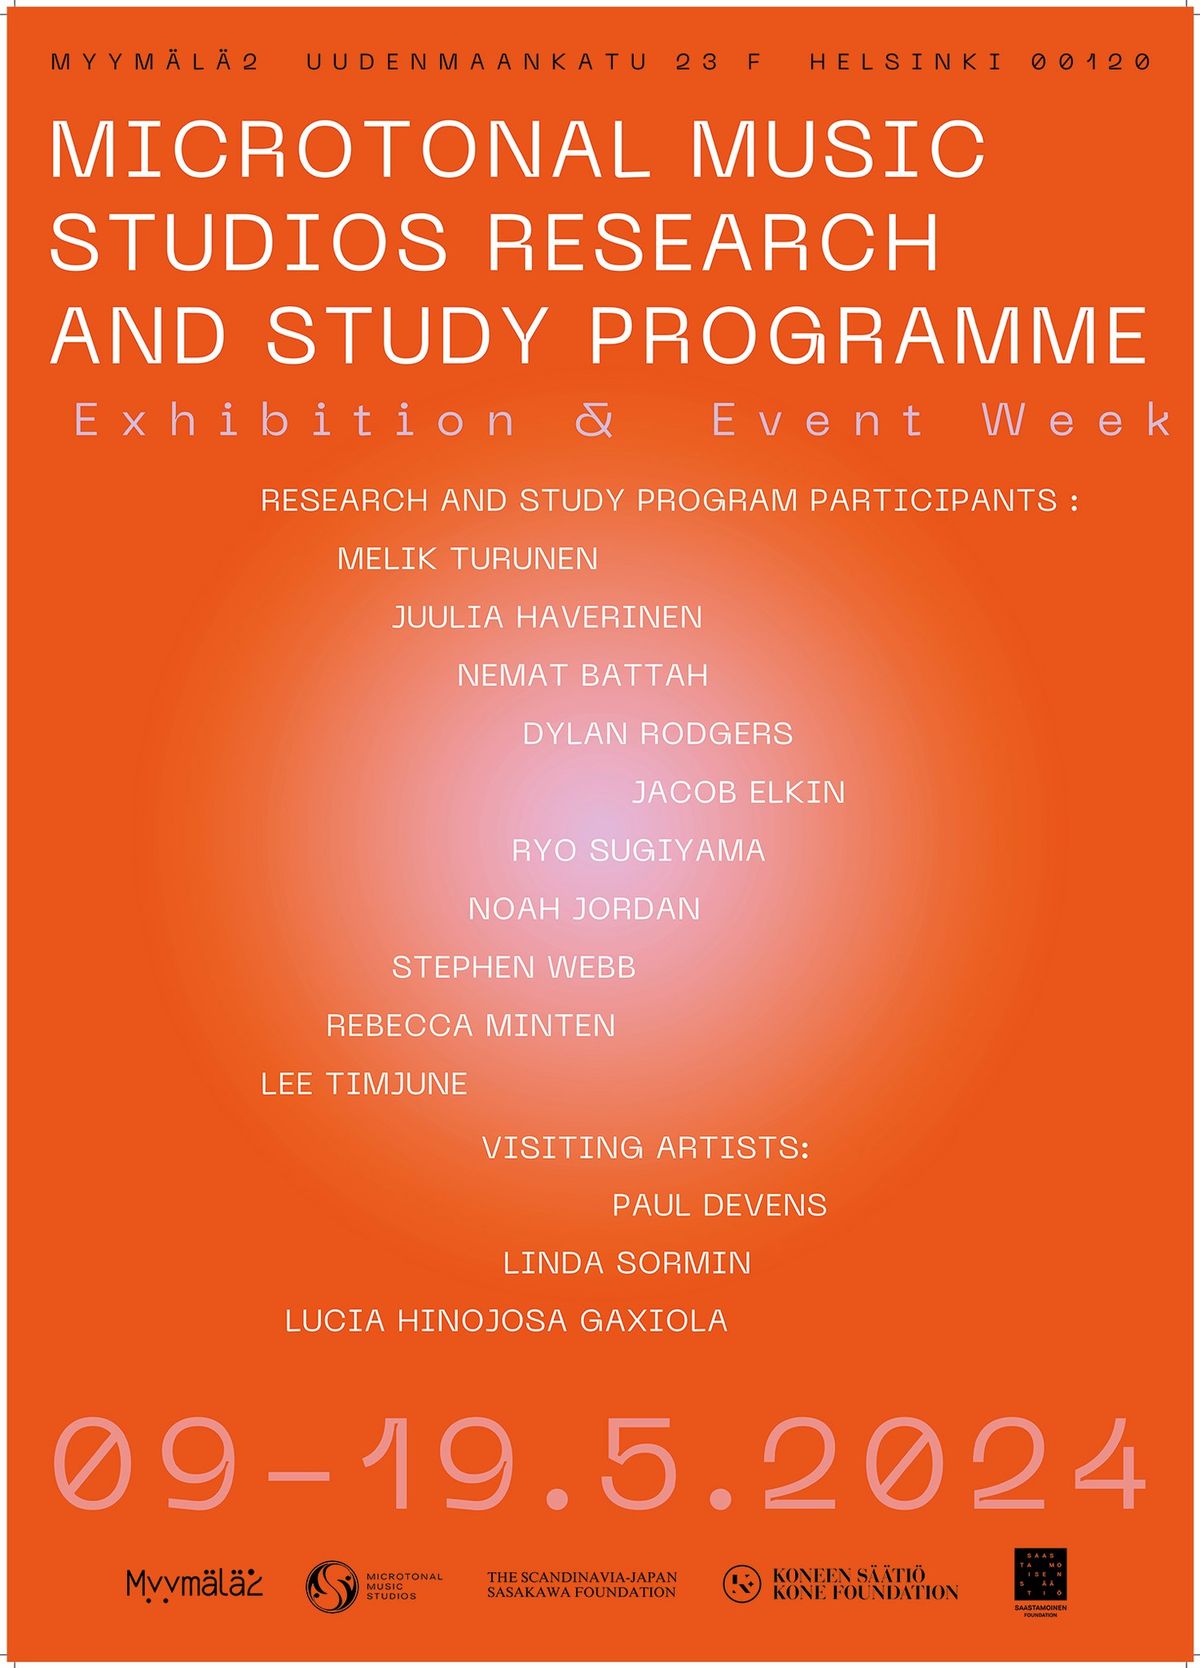 Microtonal Music Studios Research and Study Programme Exhibition and Event Week